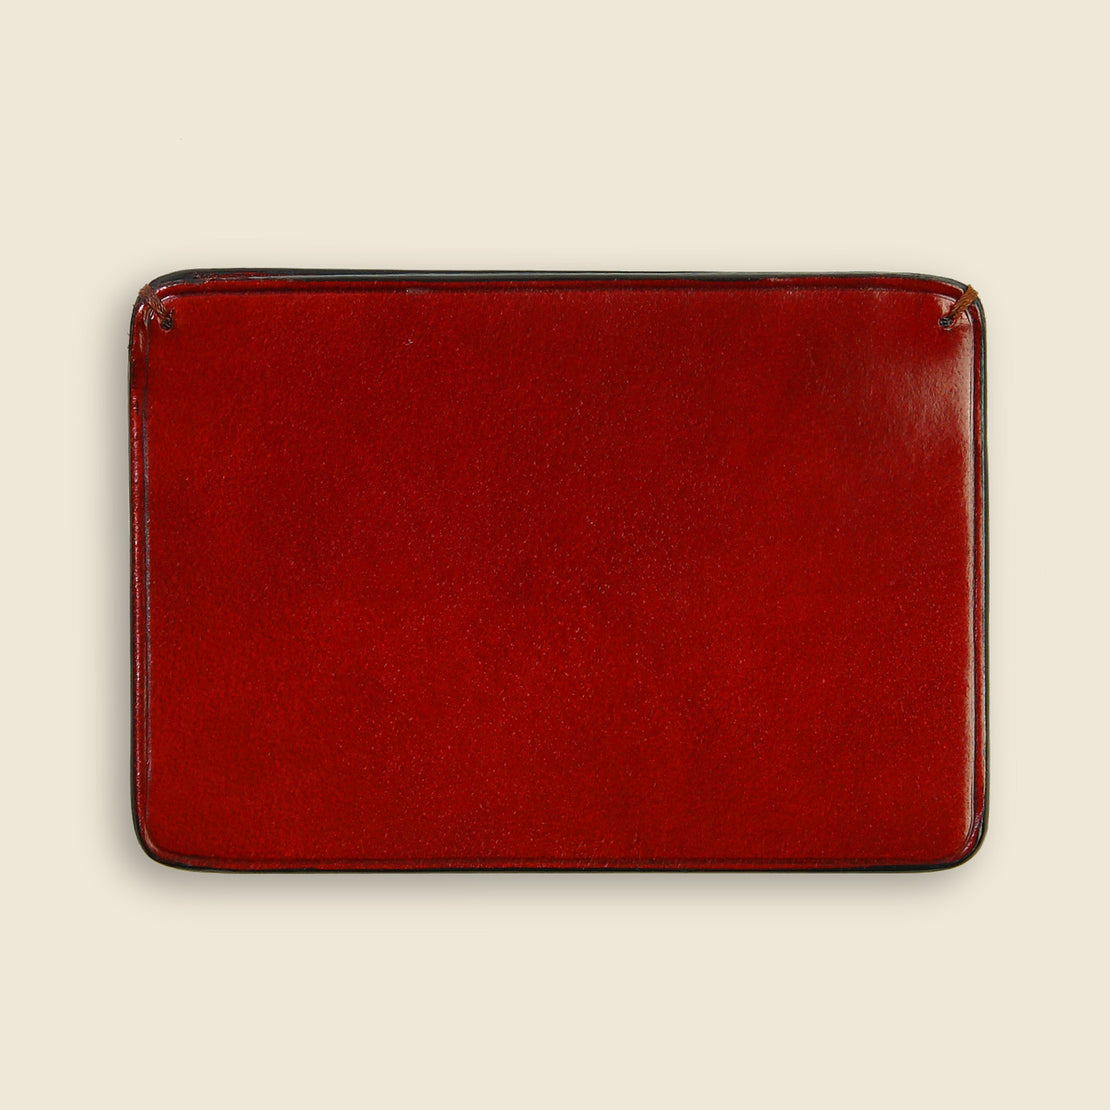 Credit Card Case - Cherry - Il Bussetto - STAG Provisions - Accessories - Wallets